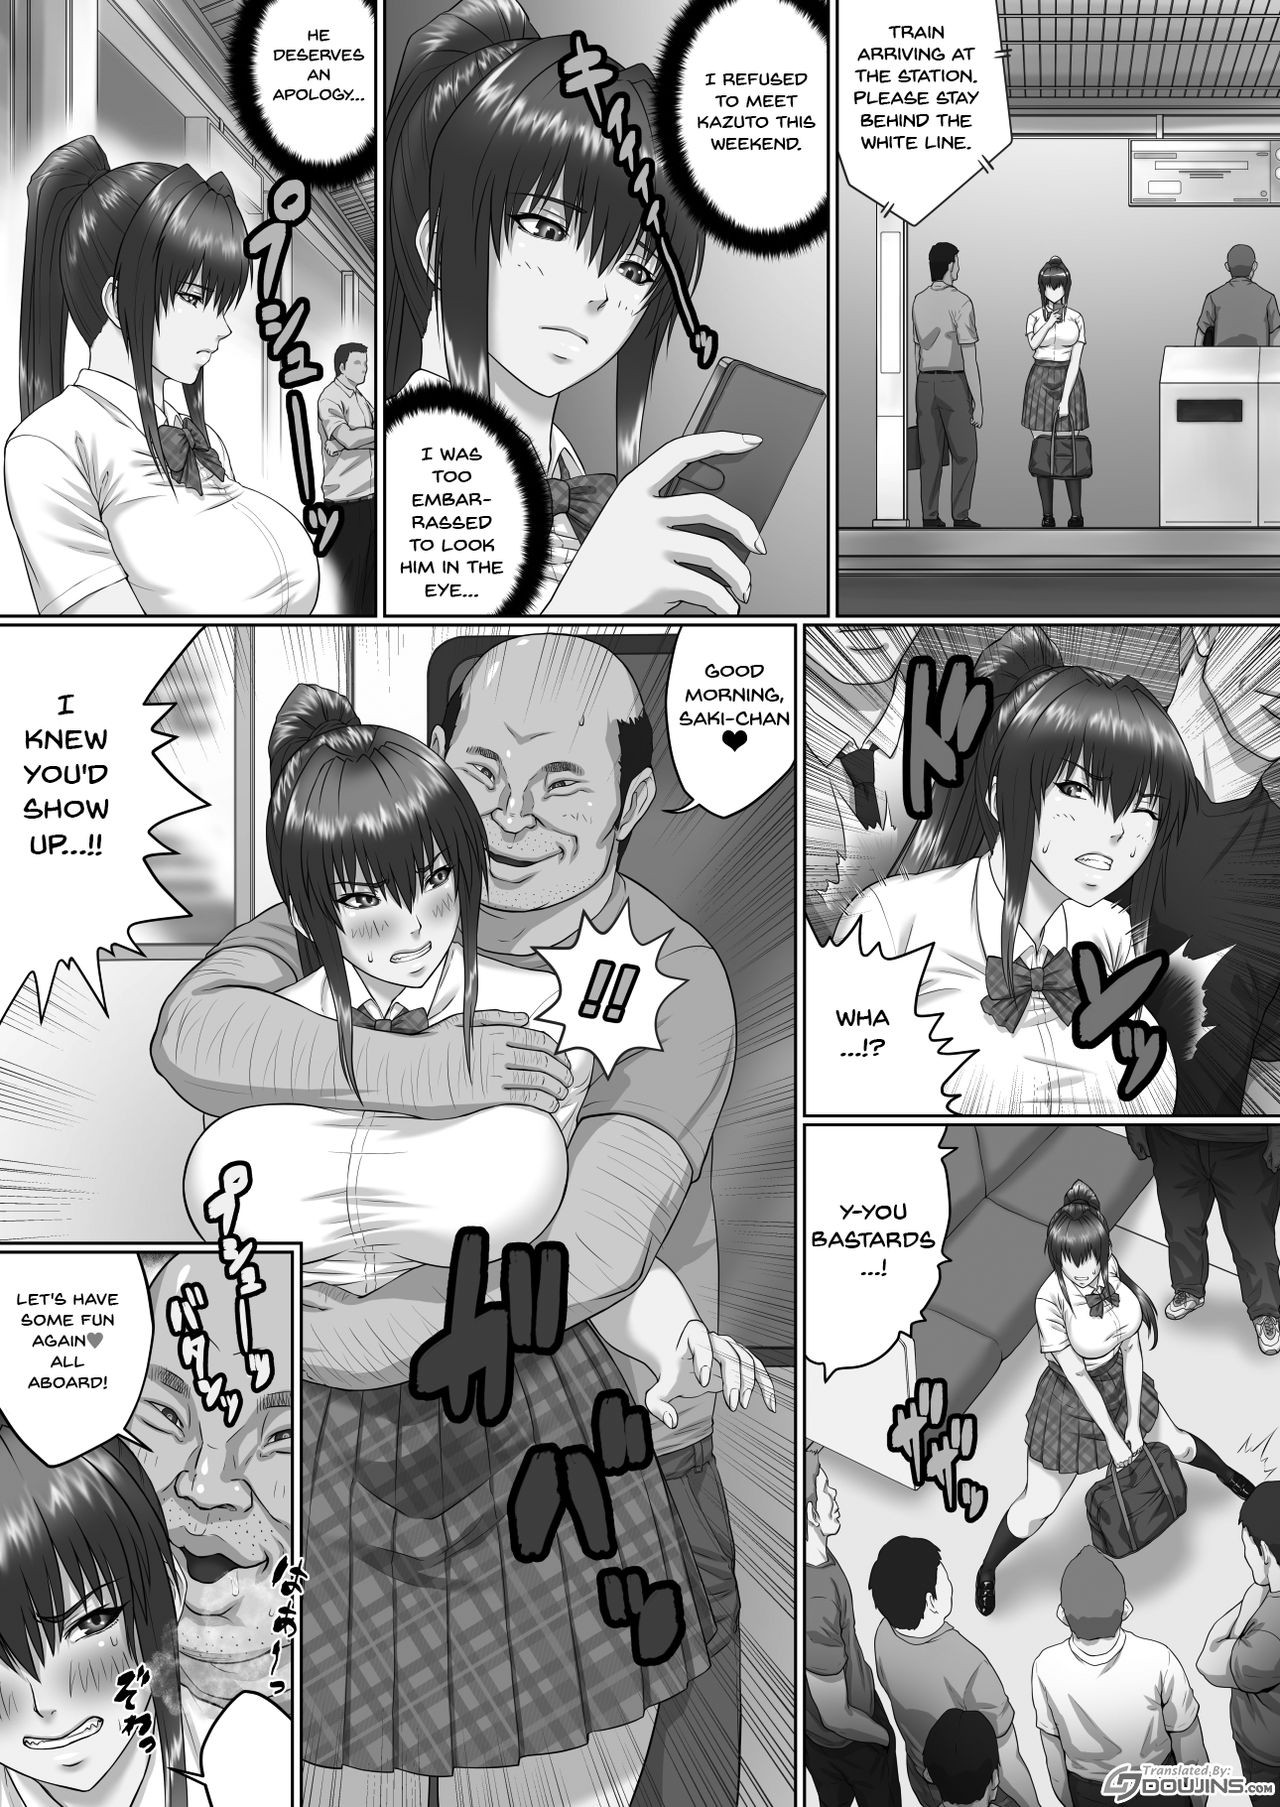 A Woman Can’t Get Away After Being Targeted By This Horny Old Man Part 2 Porn Comic english 03